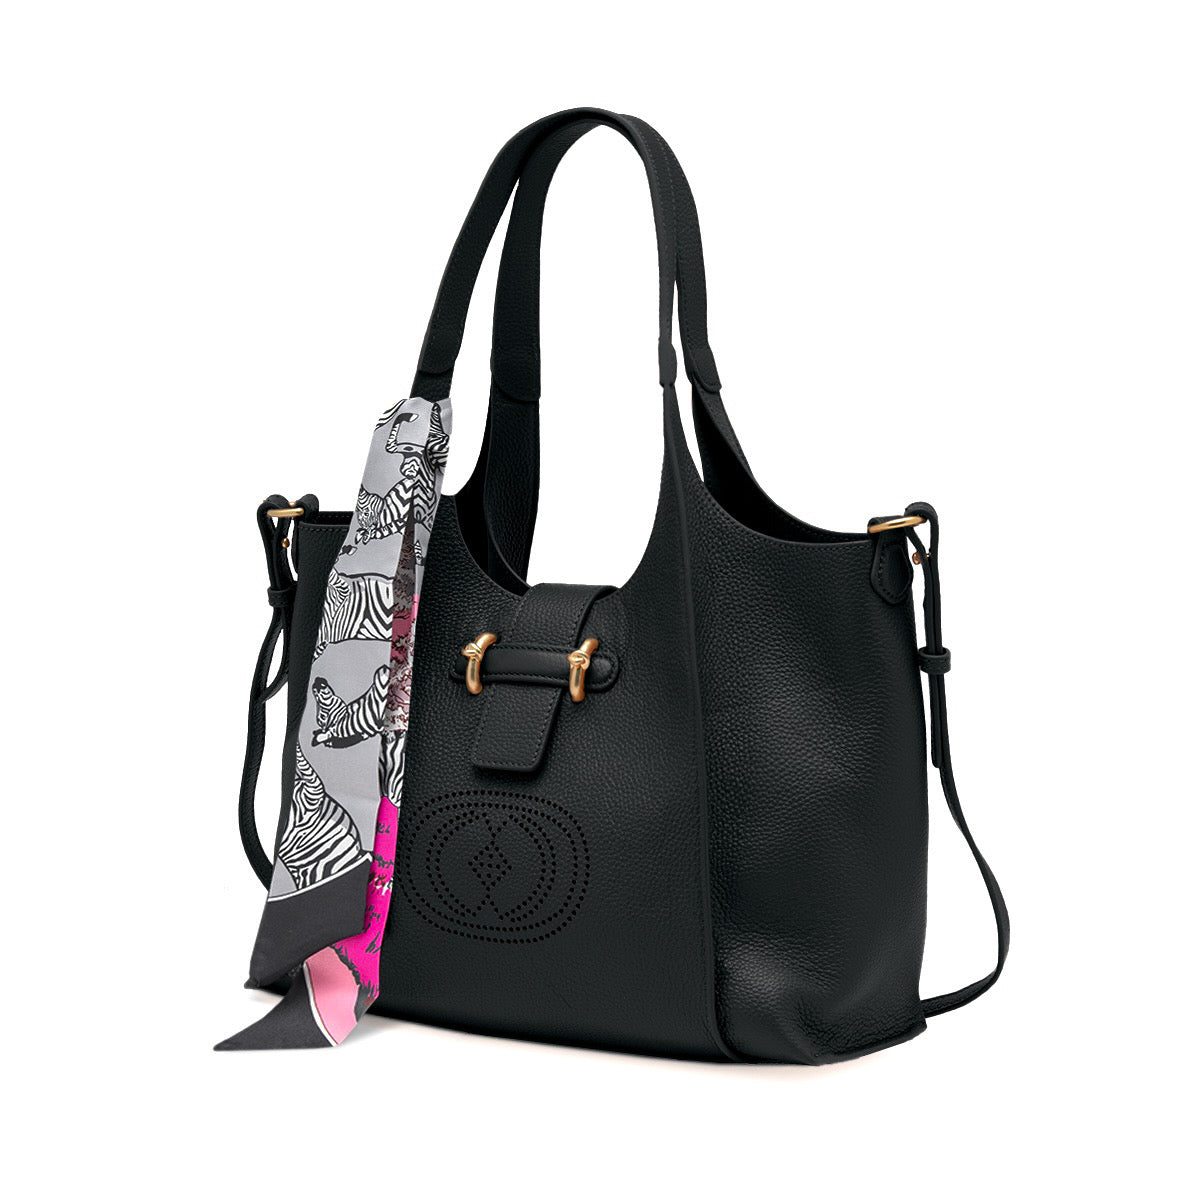 The Carrie Bag Drilled Bag